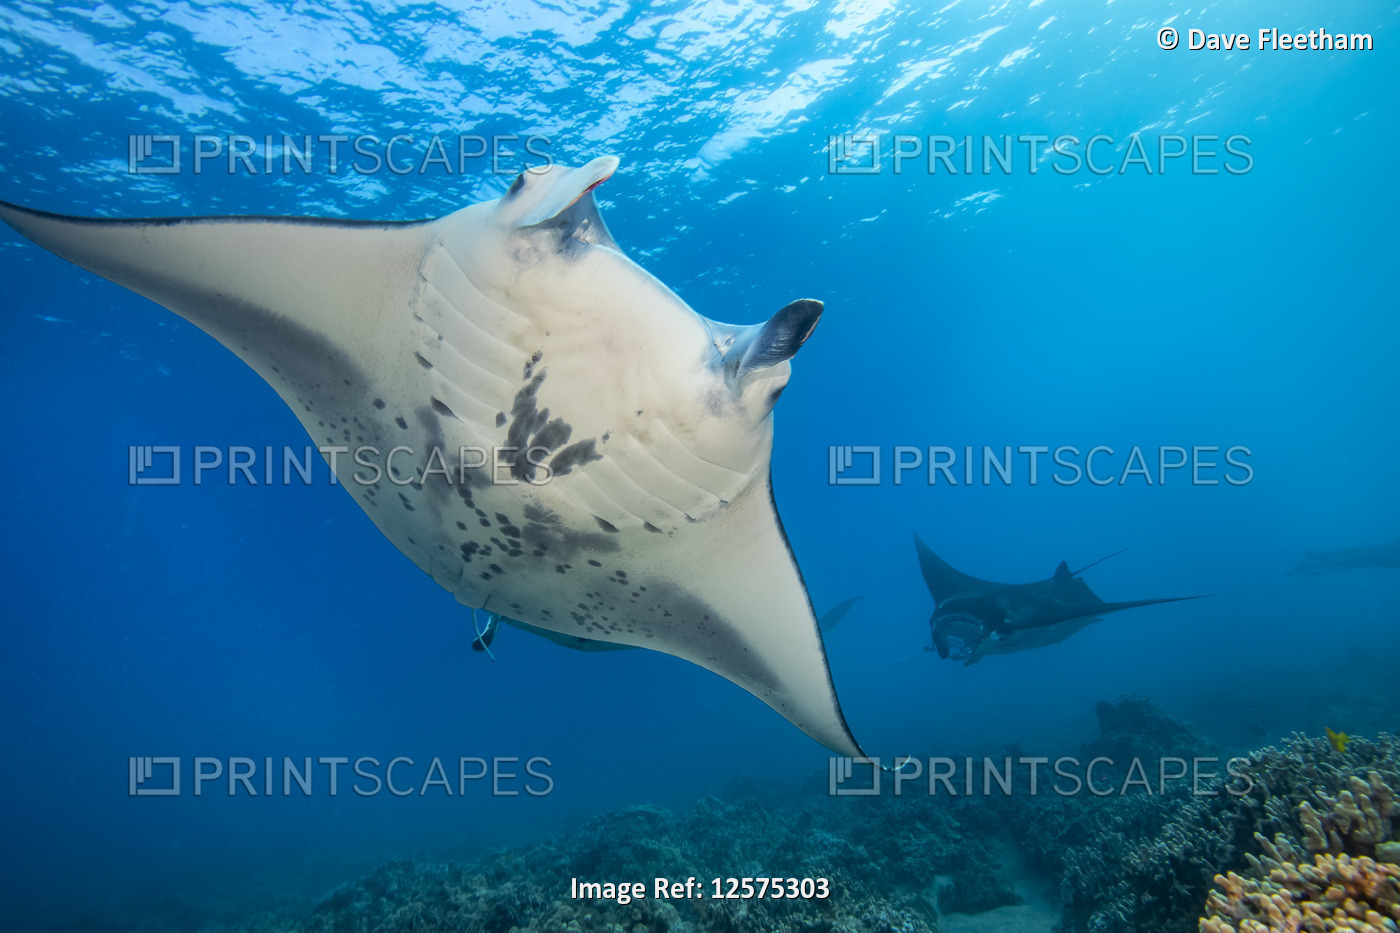 Reef manta rays (Manta alfredi) cruise over the shallows off Ukumehame in a ...